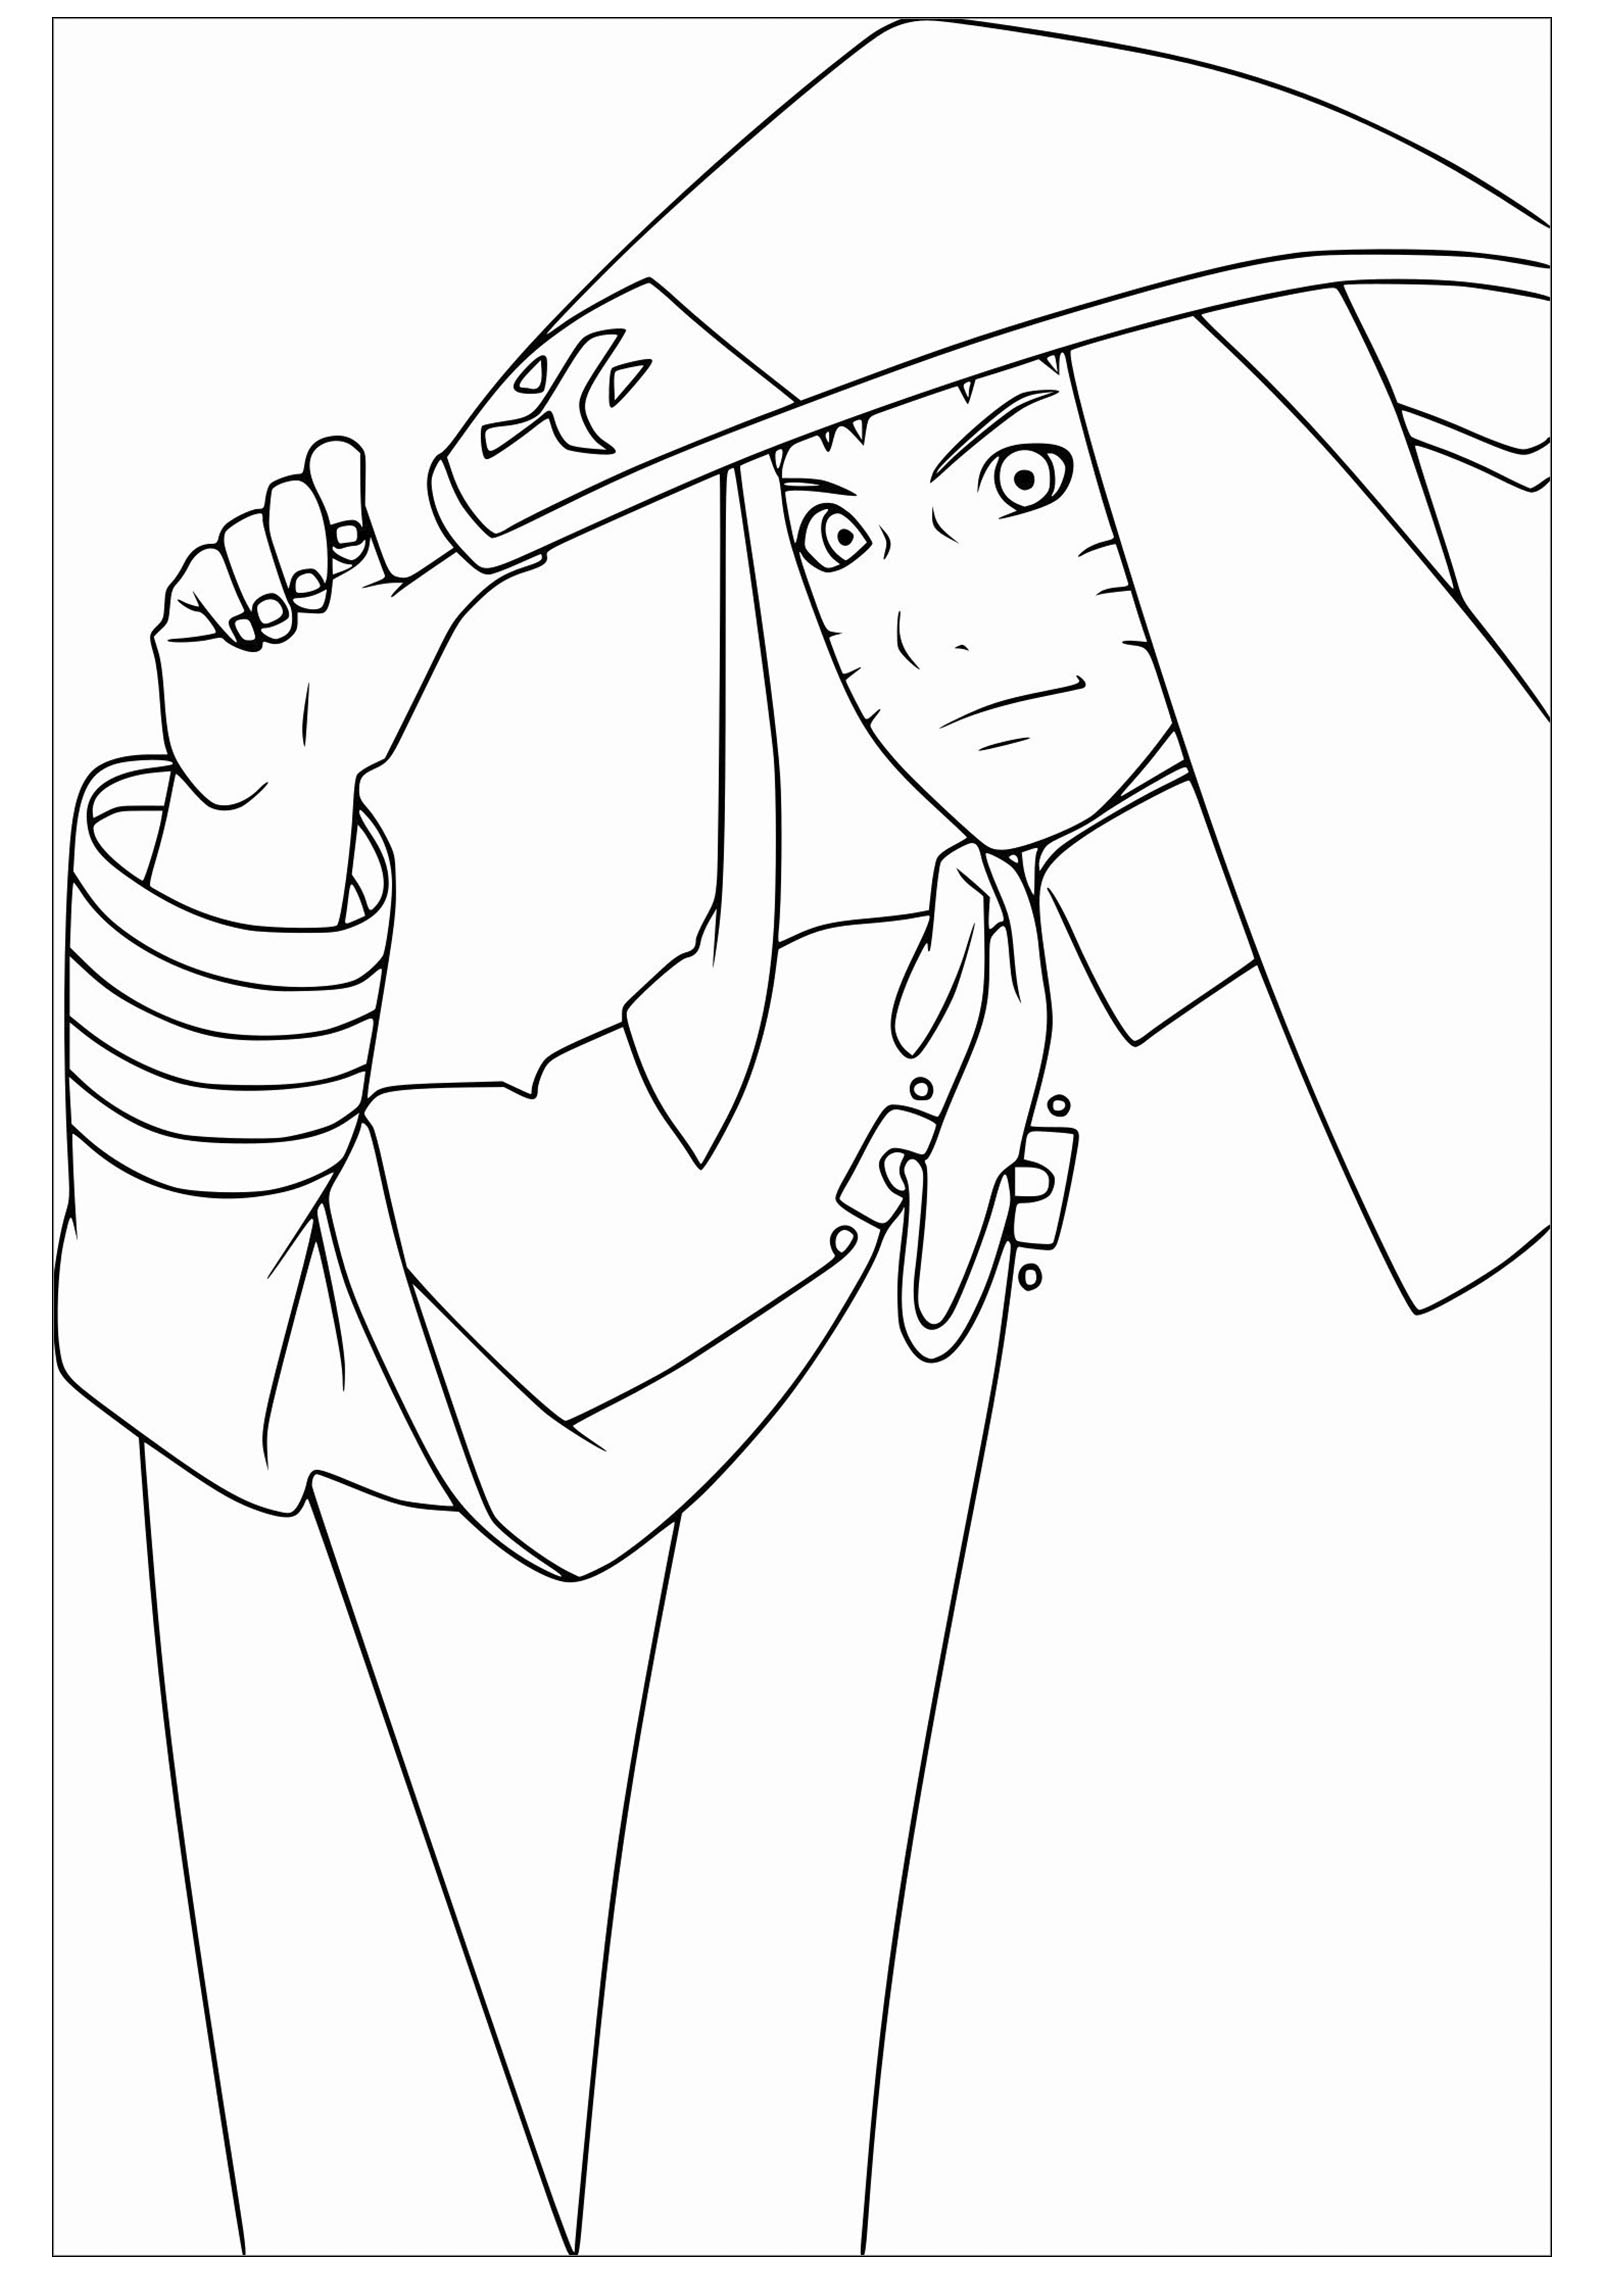 Download Naruto to print for free - Naruto Kids Coloring Pages